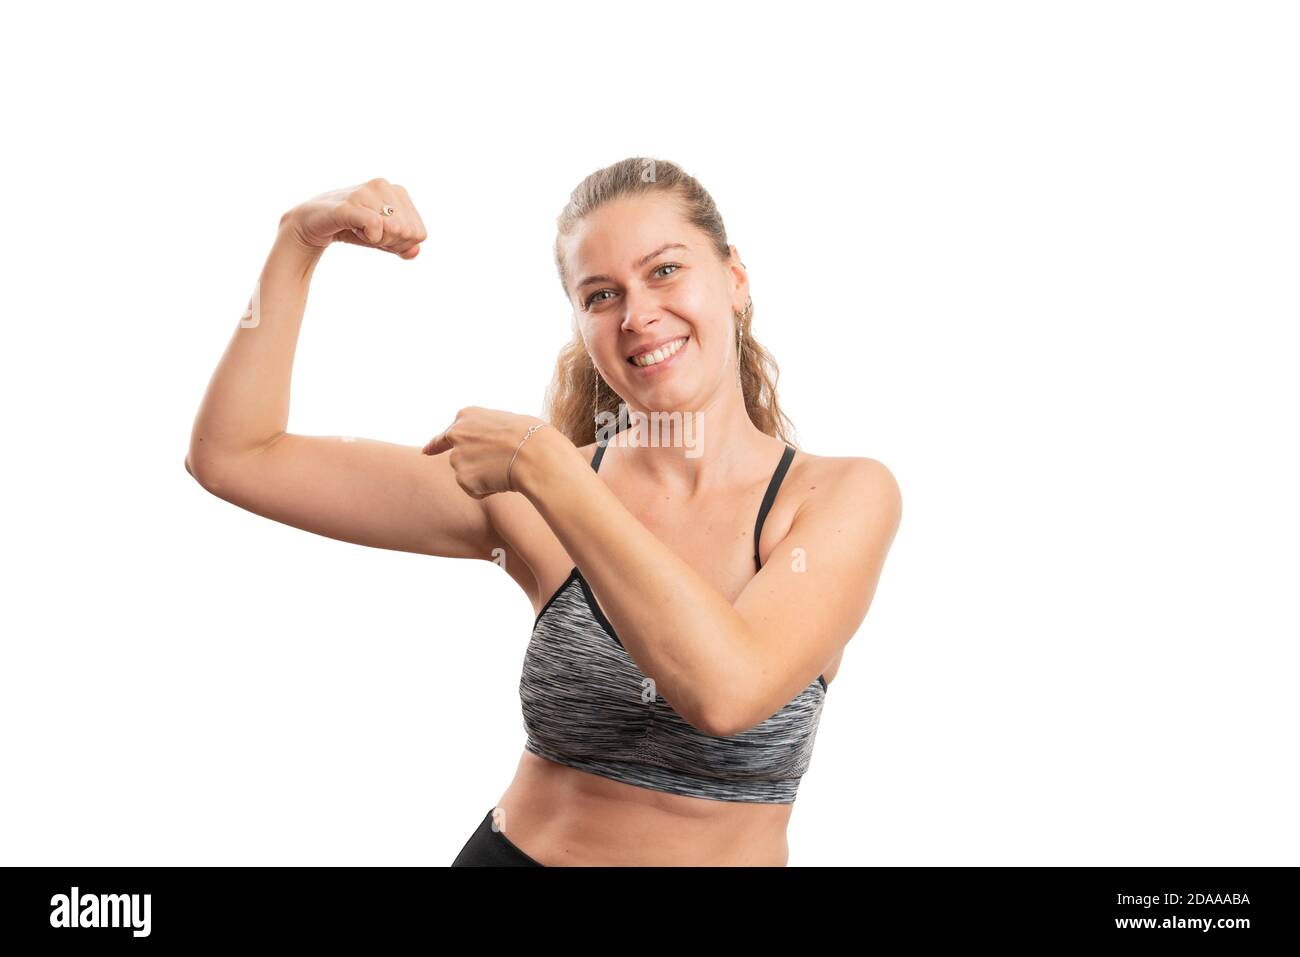 Cheerful woman model pointing index finger at biceps muscle as healthy workout concept wearing sports gym attire isolated on white studio background w Stock Photo